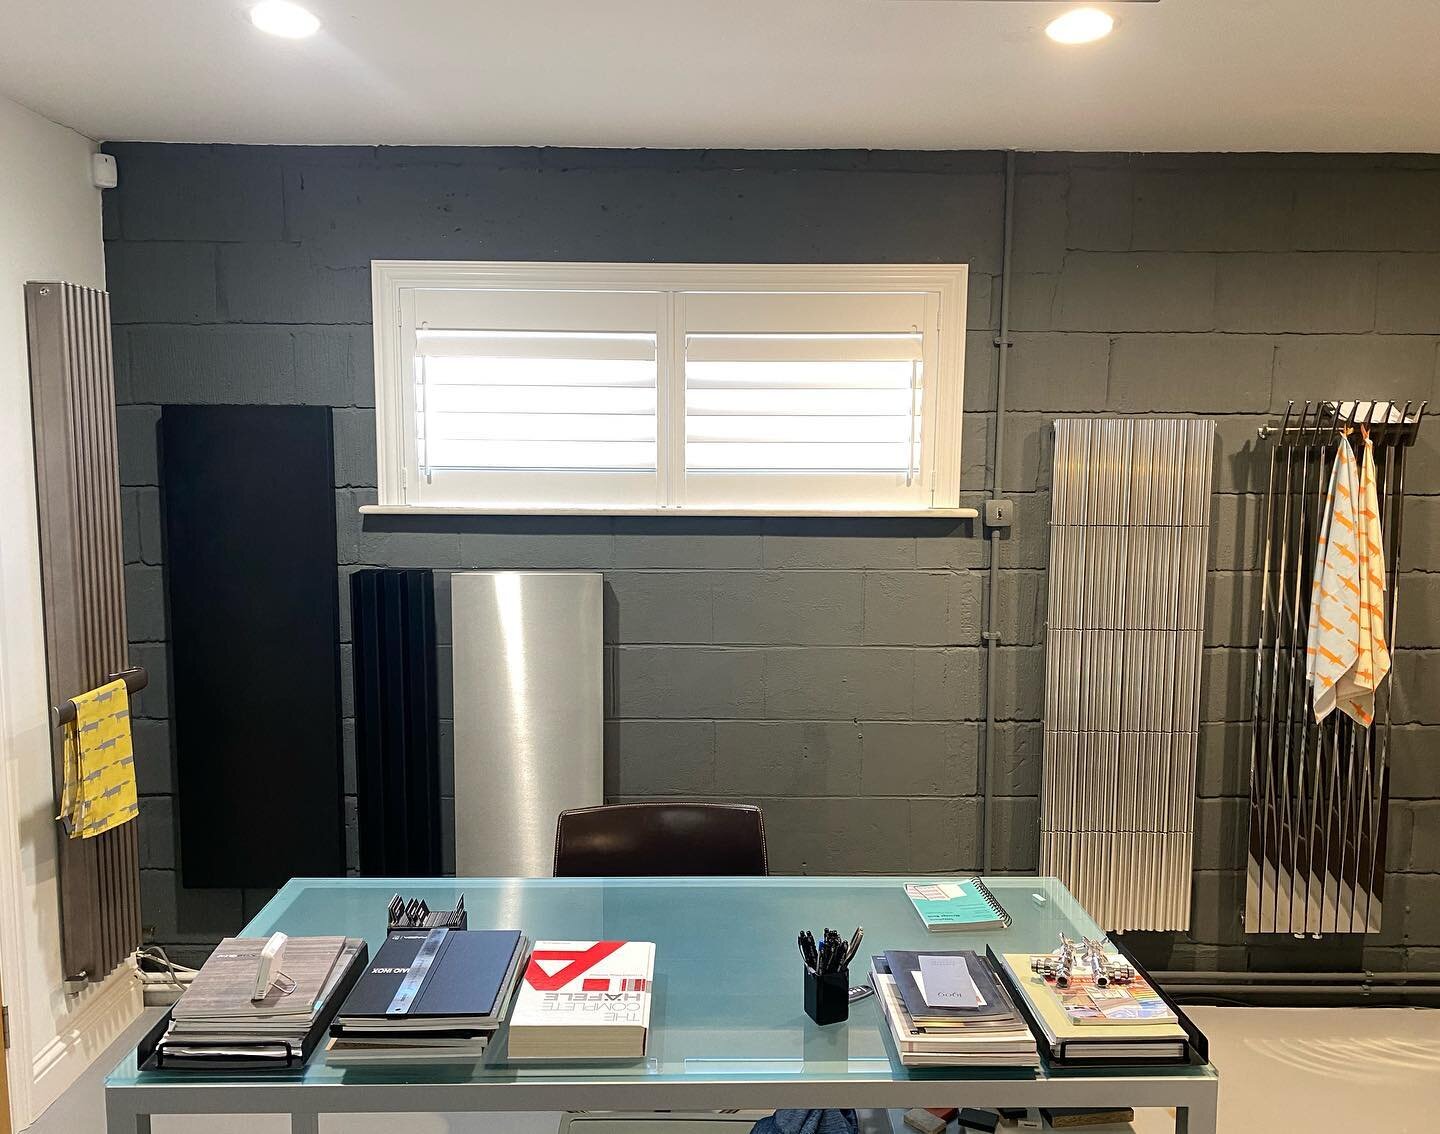 Come check out our showroom @kitchencentro in Brentwood. We have a wide range of shutters, radiators and beautiful bespoke kitchens to look at if you need some inspiration for those home improvements. #plantationshutters #radiators #kitchens #homeimp